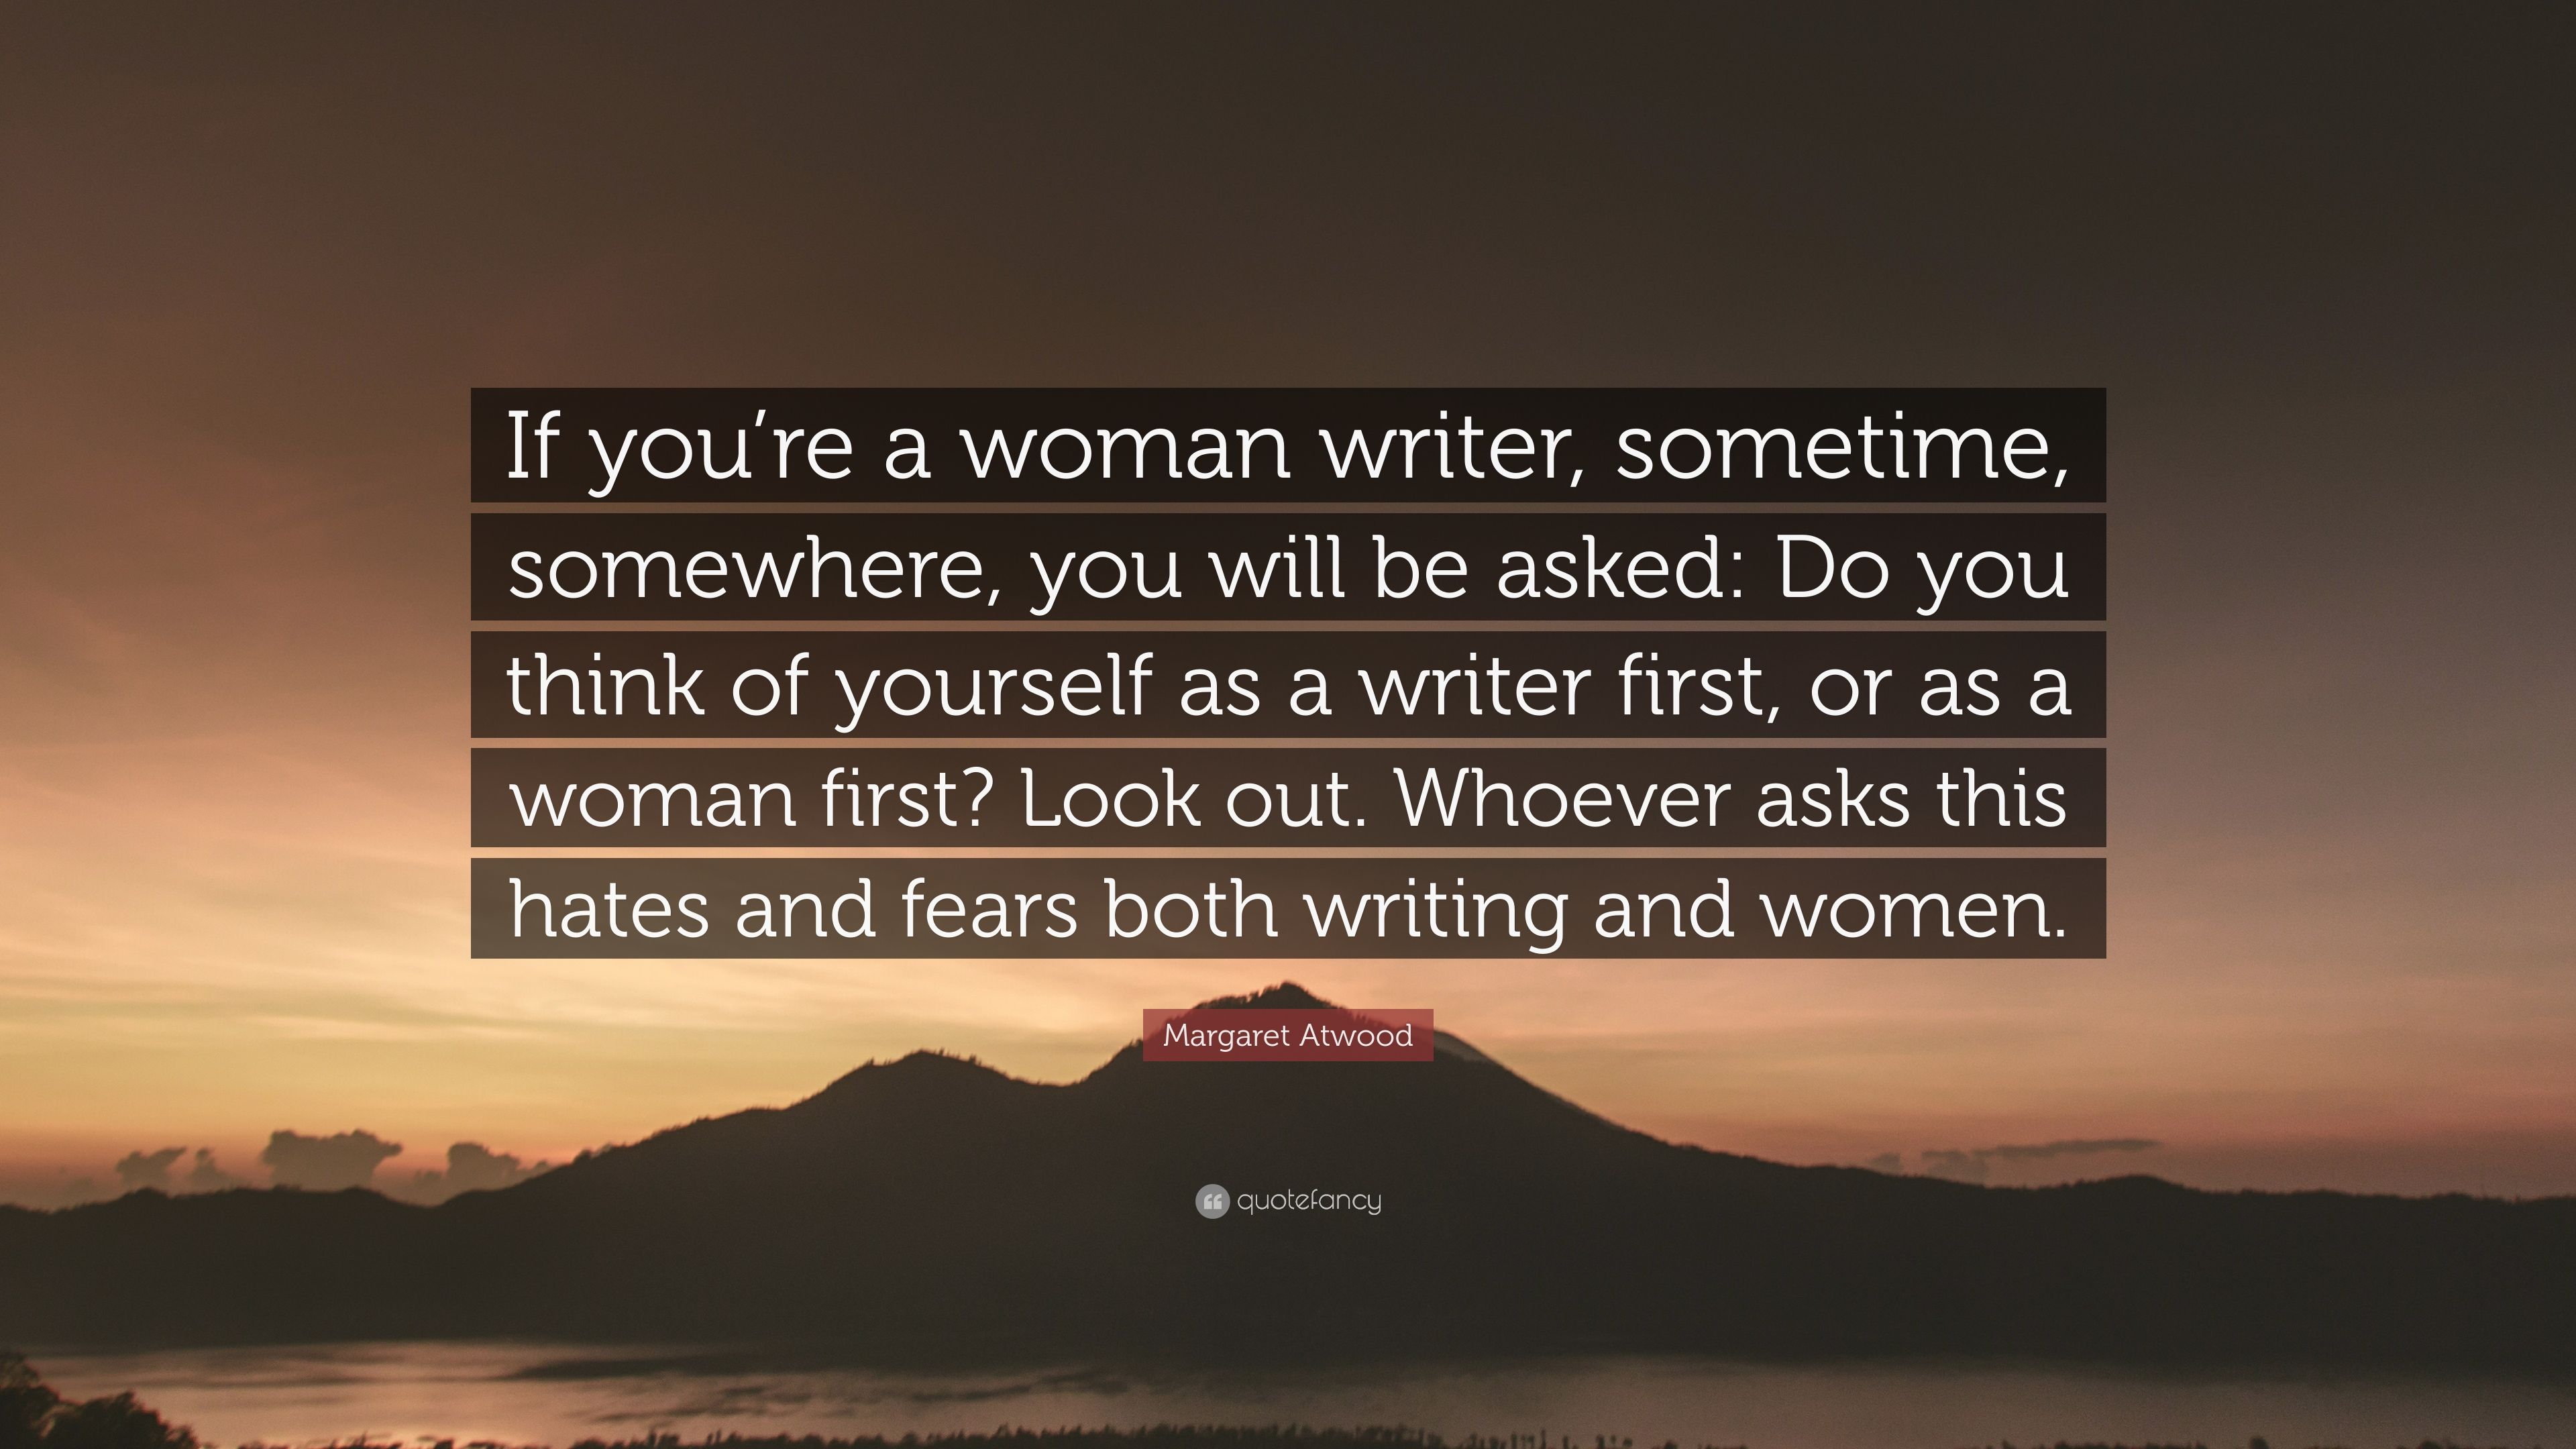 Margaret Atwood Quote: “If you're a woman writer, sometime